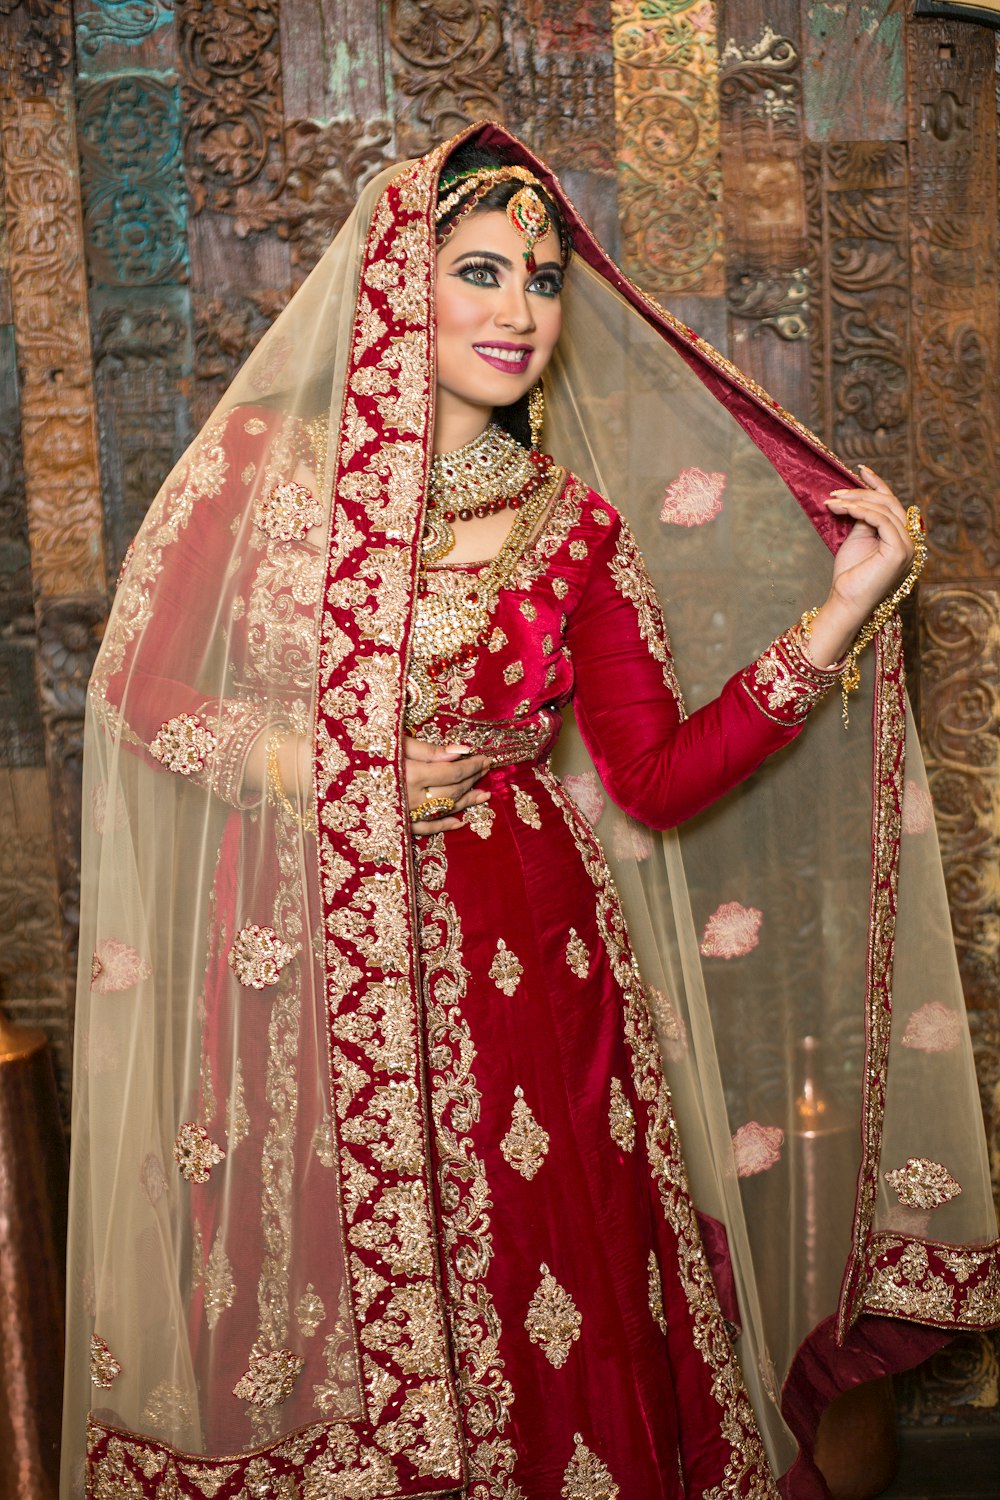 woman in red and white floral sari